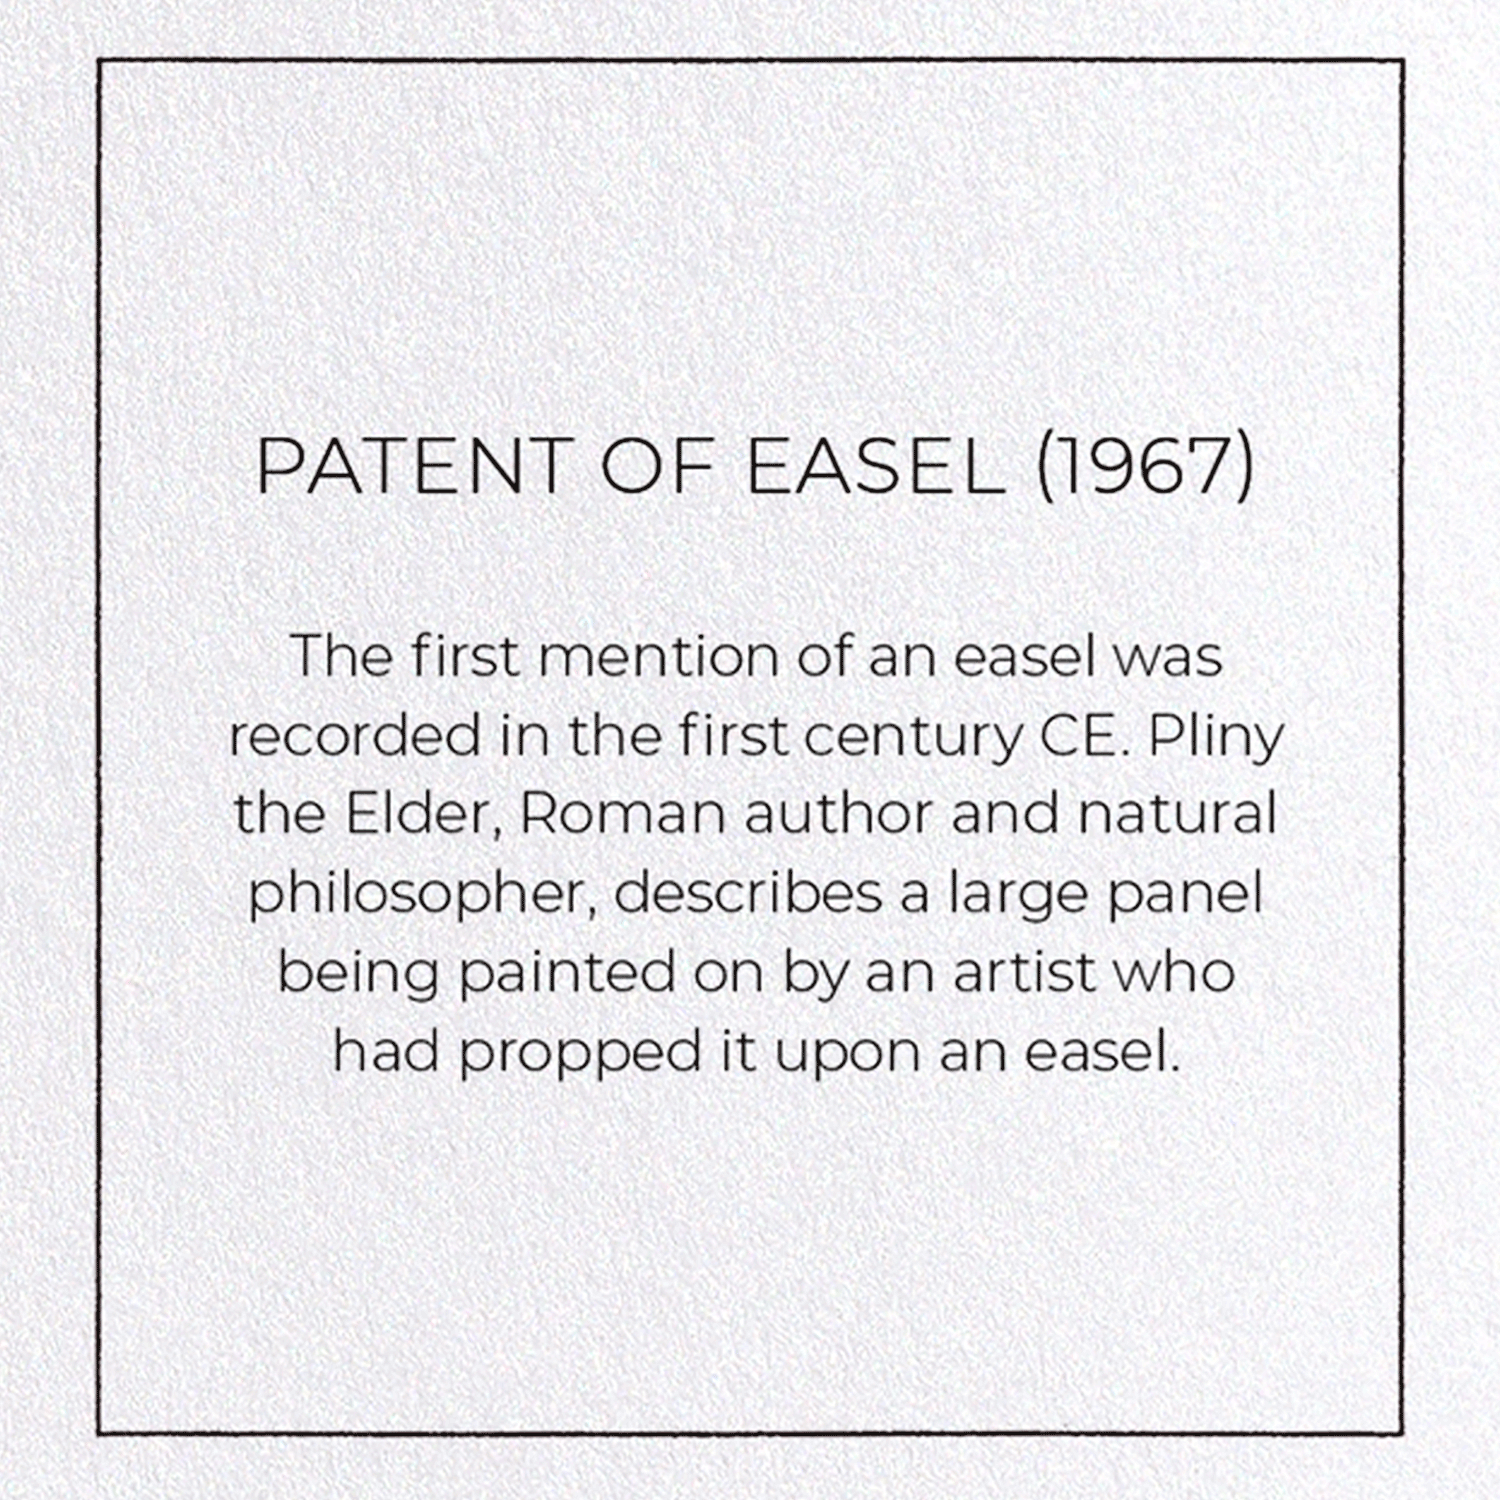 PATENT OF EASEL (1967)